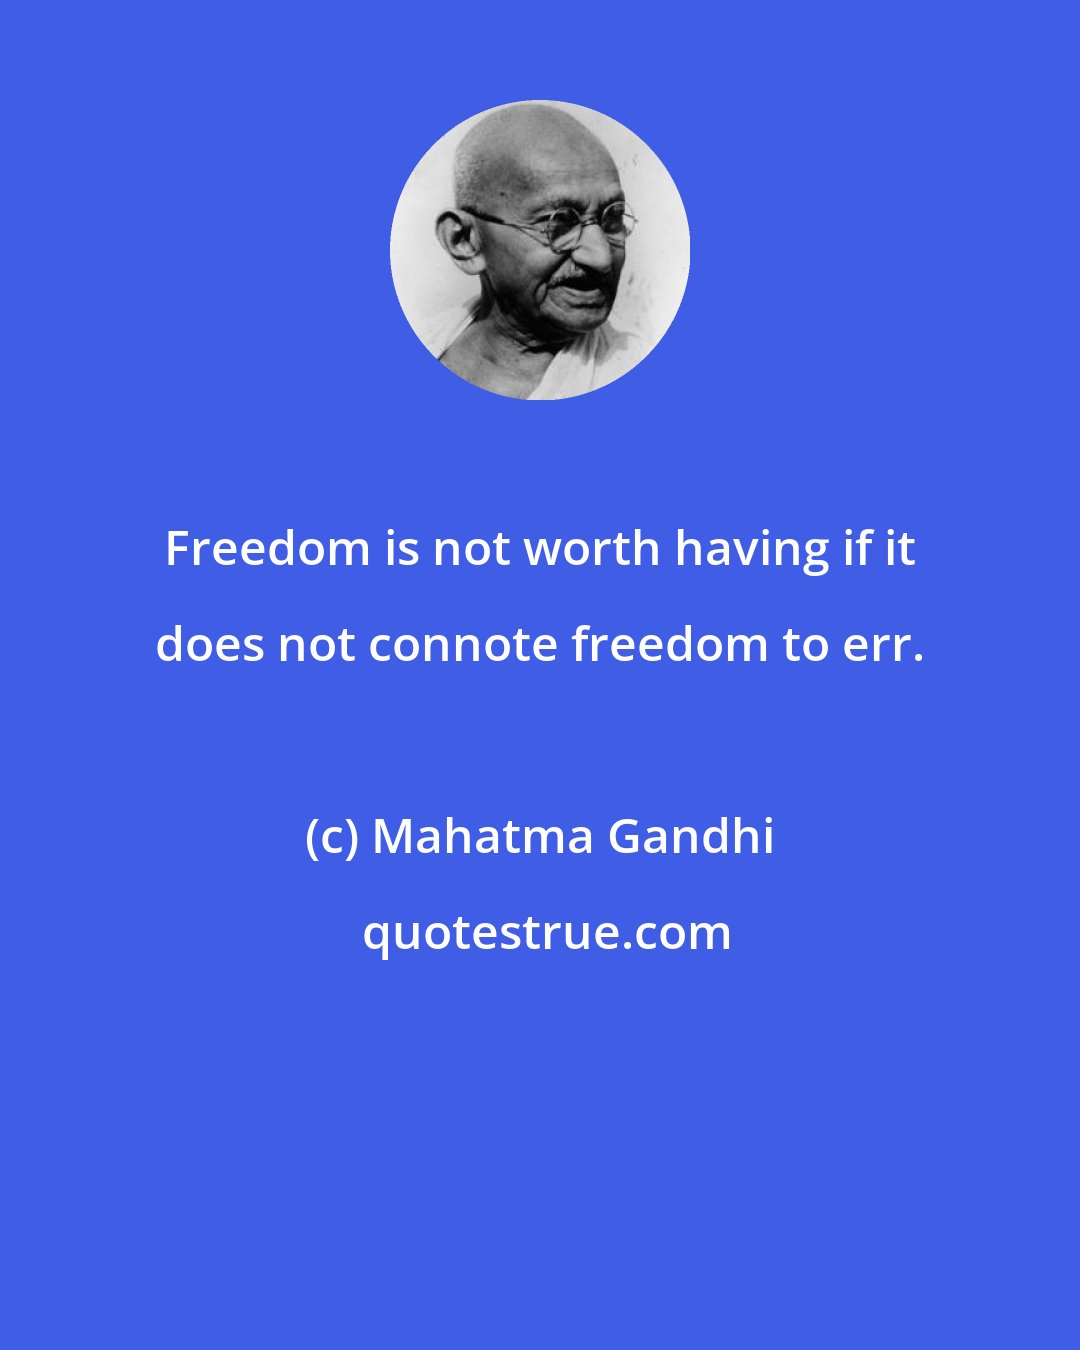 Mahatma Gandhi: Freedom is not worth having if it does not connote freedom to err.